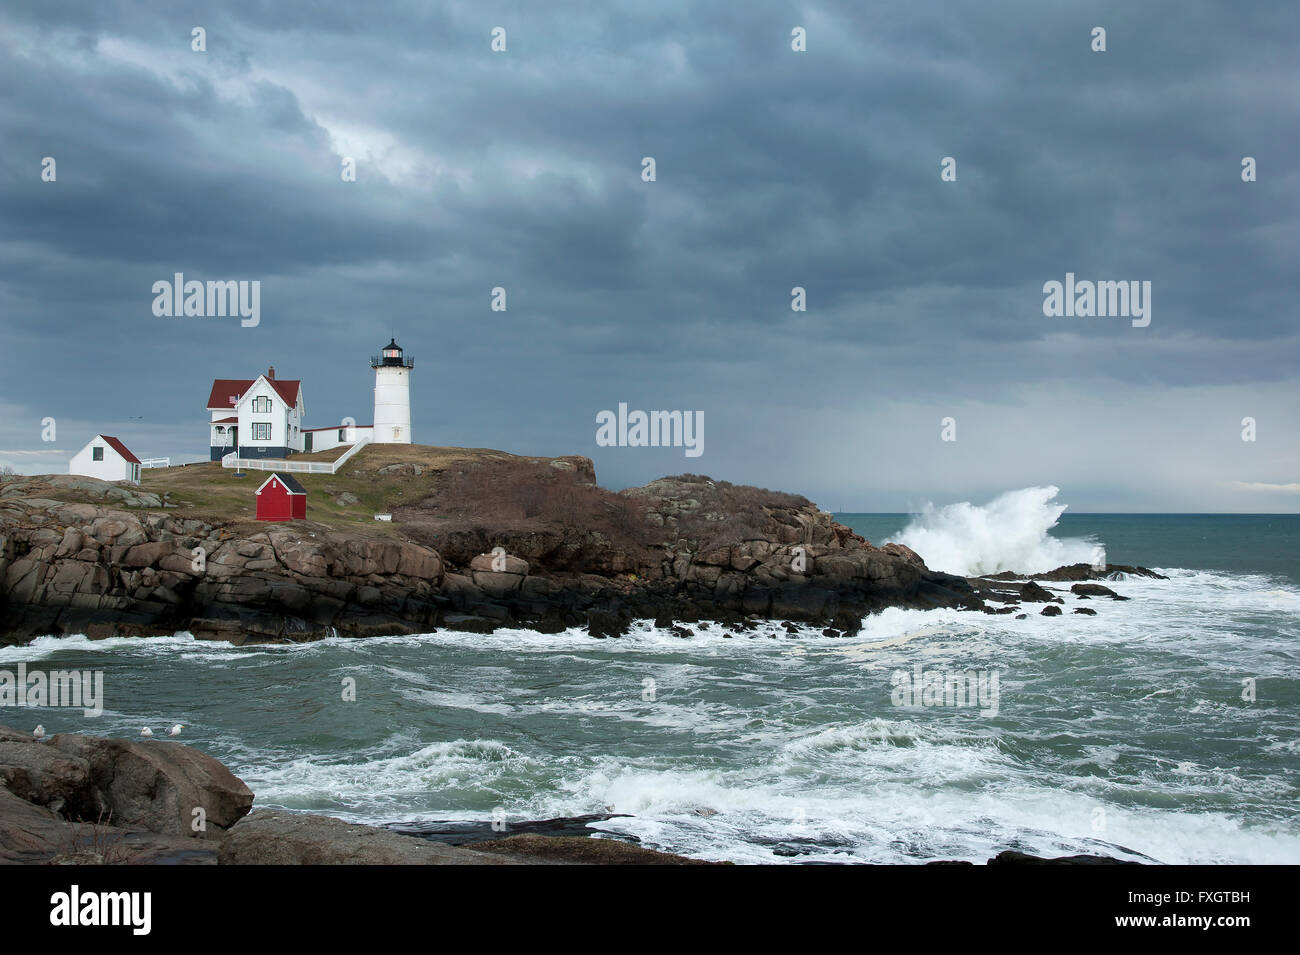 Storm clouds over Nubble lighthouse as waves crash on rocky coast of Maine. Stock Photo